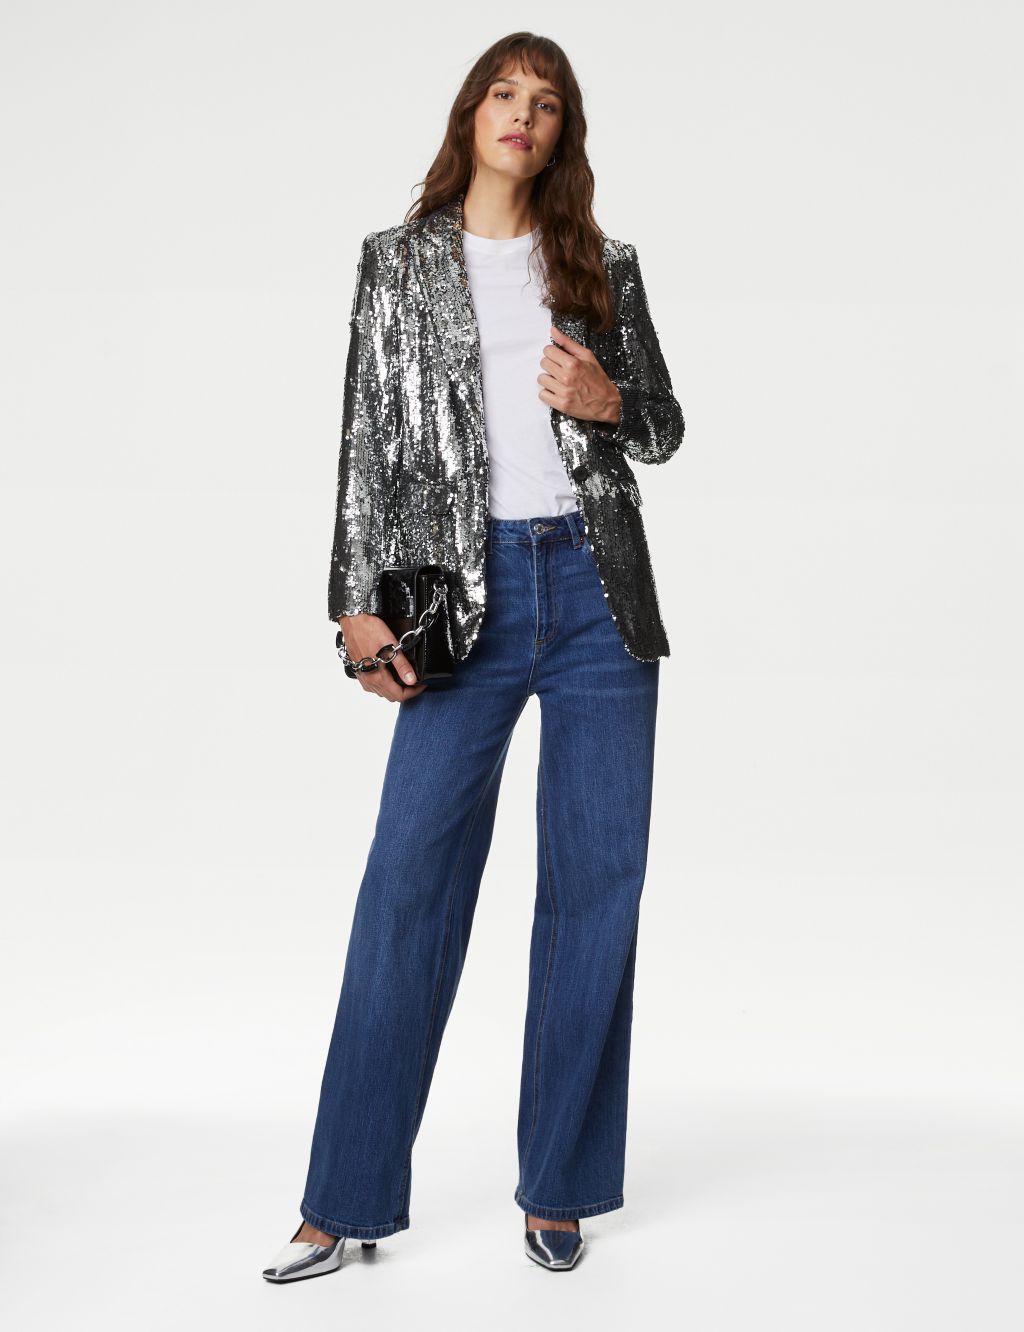 Tailored Sequin Single Breasted Blazer image 4